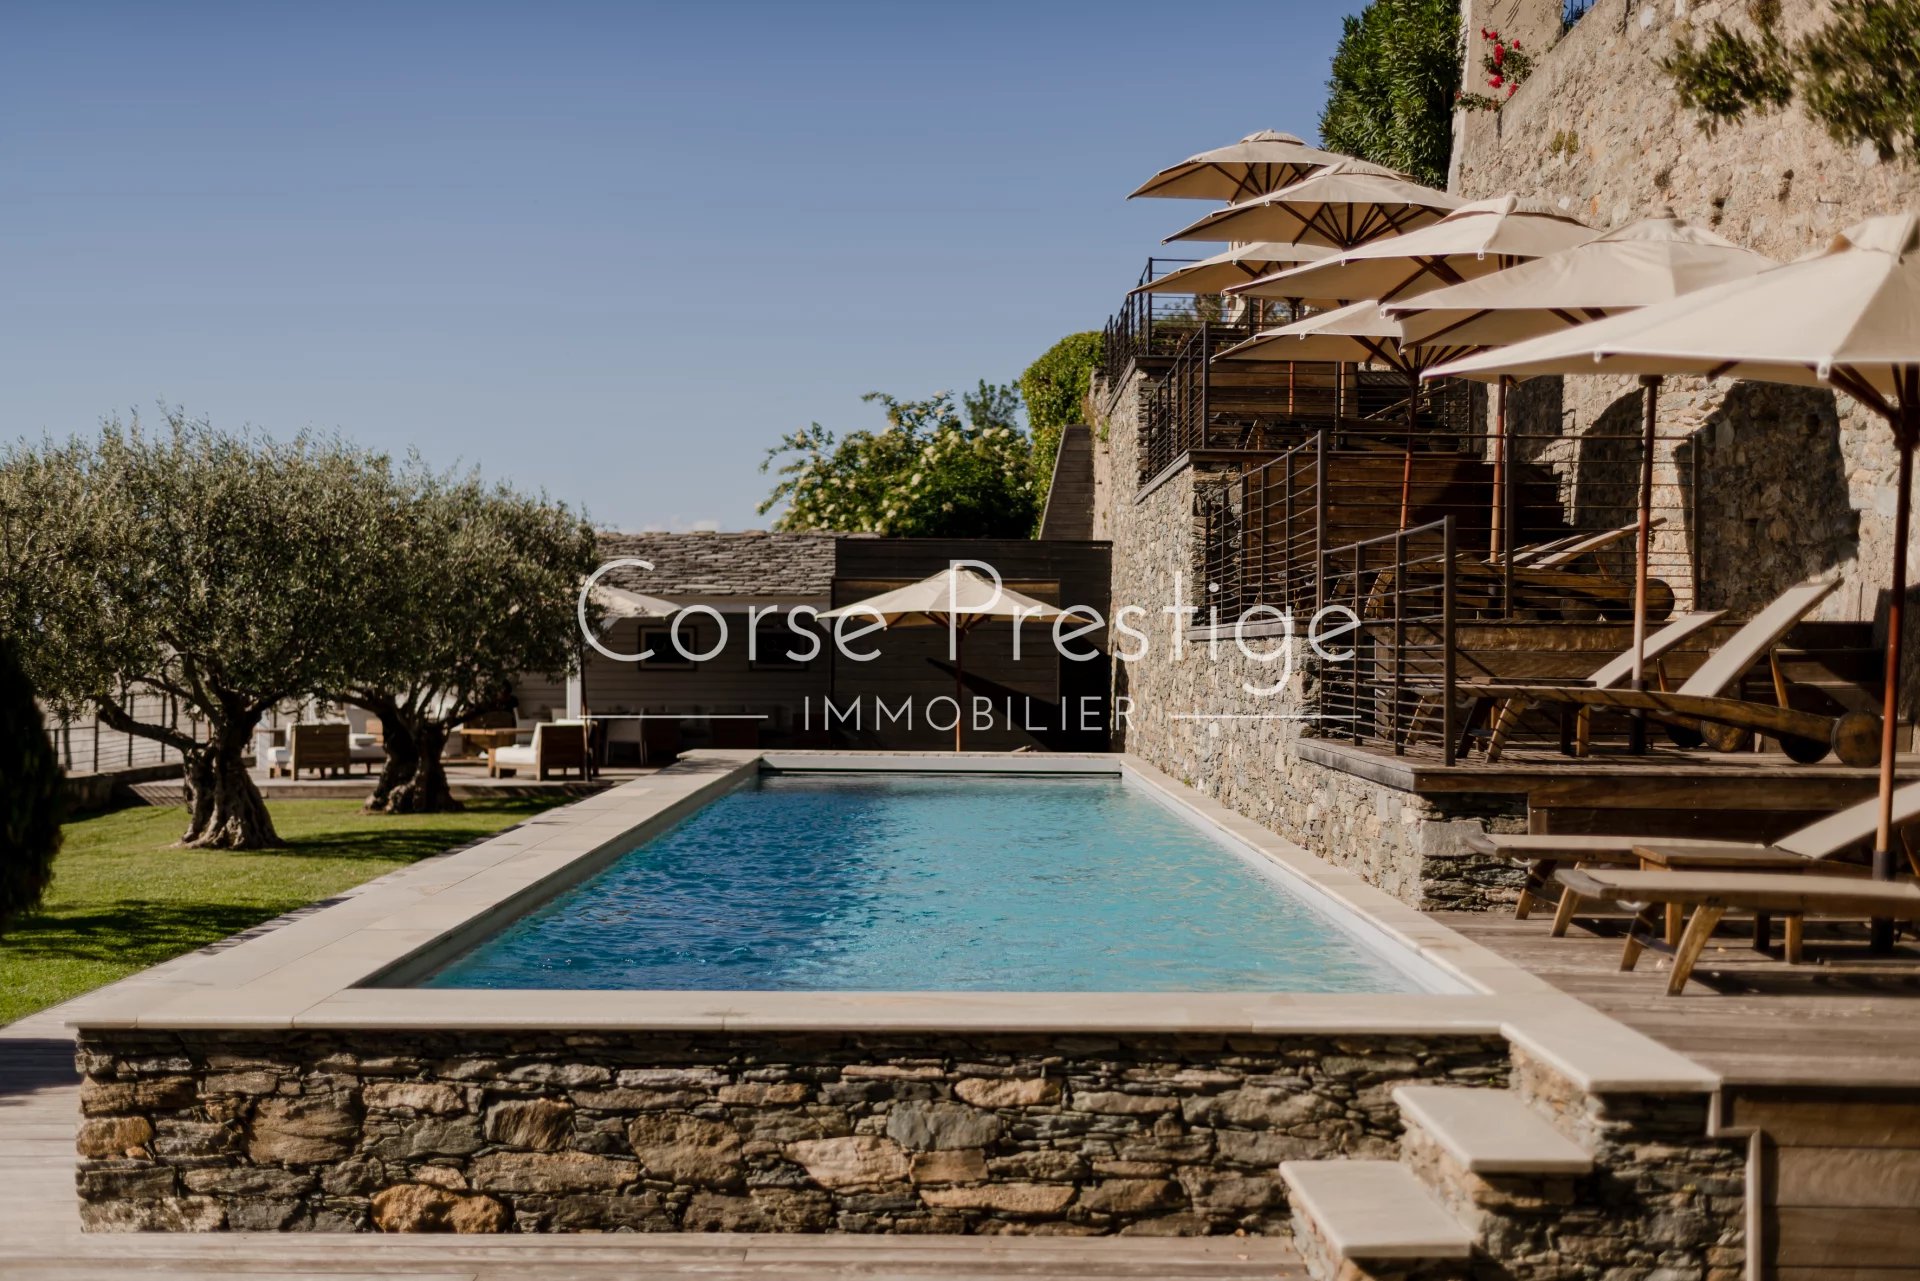 hotel for sale in corsica image2